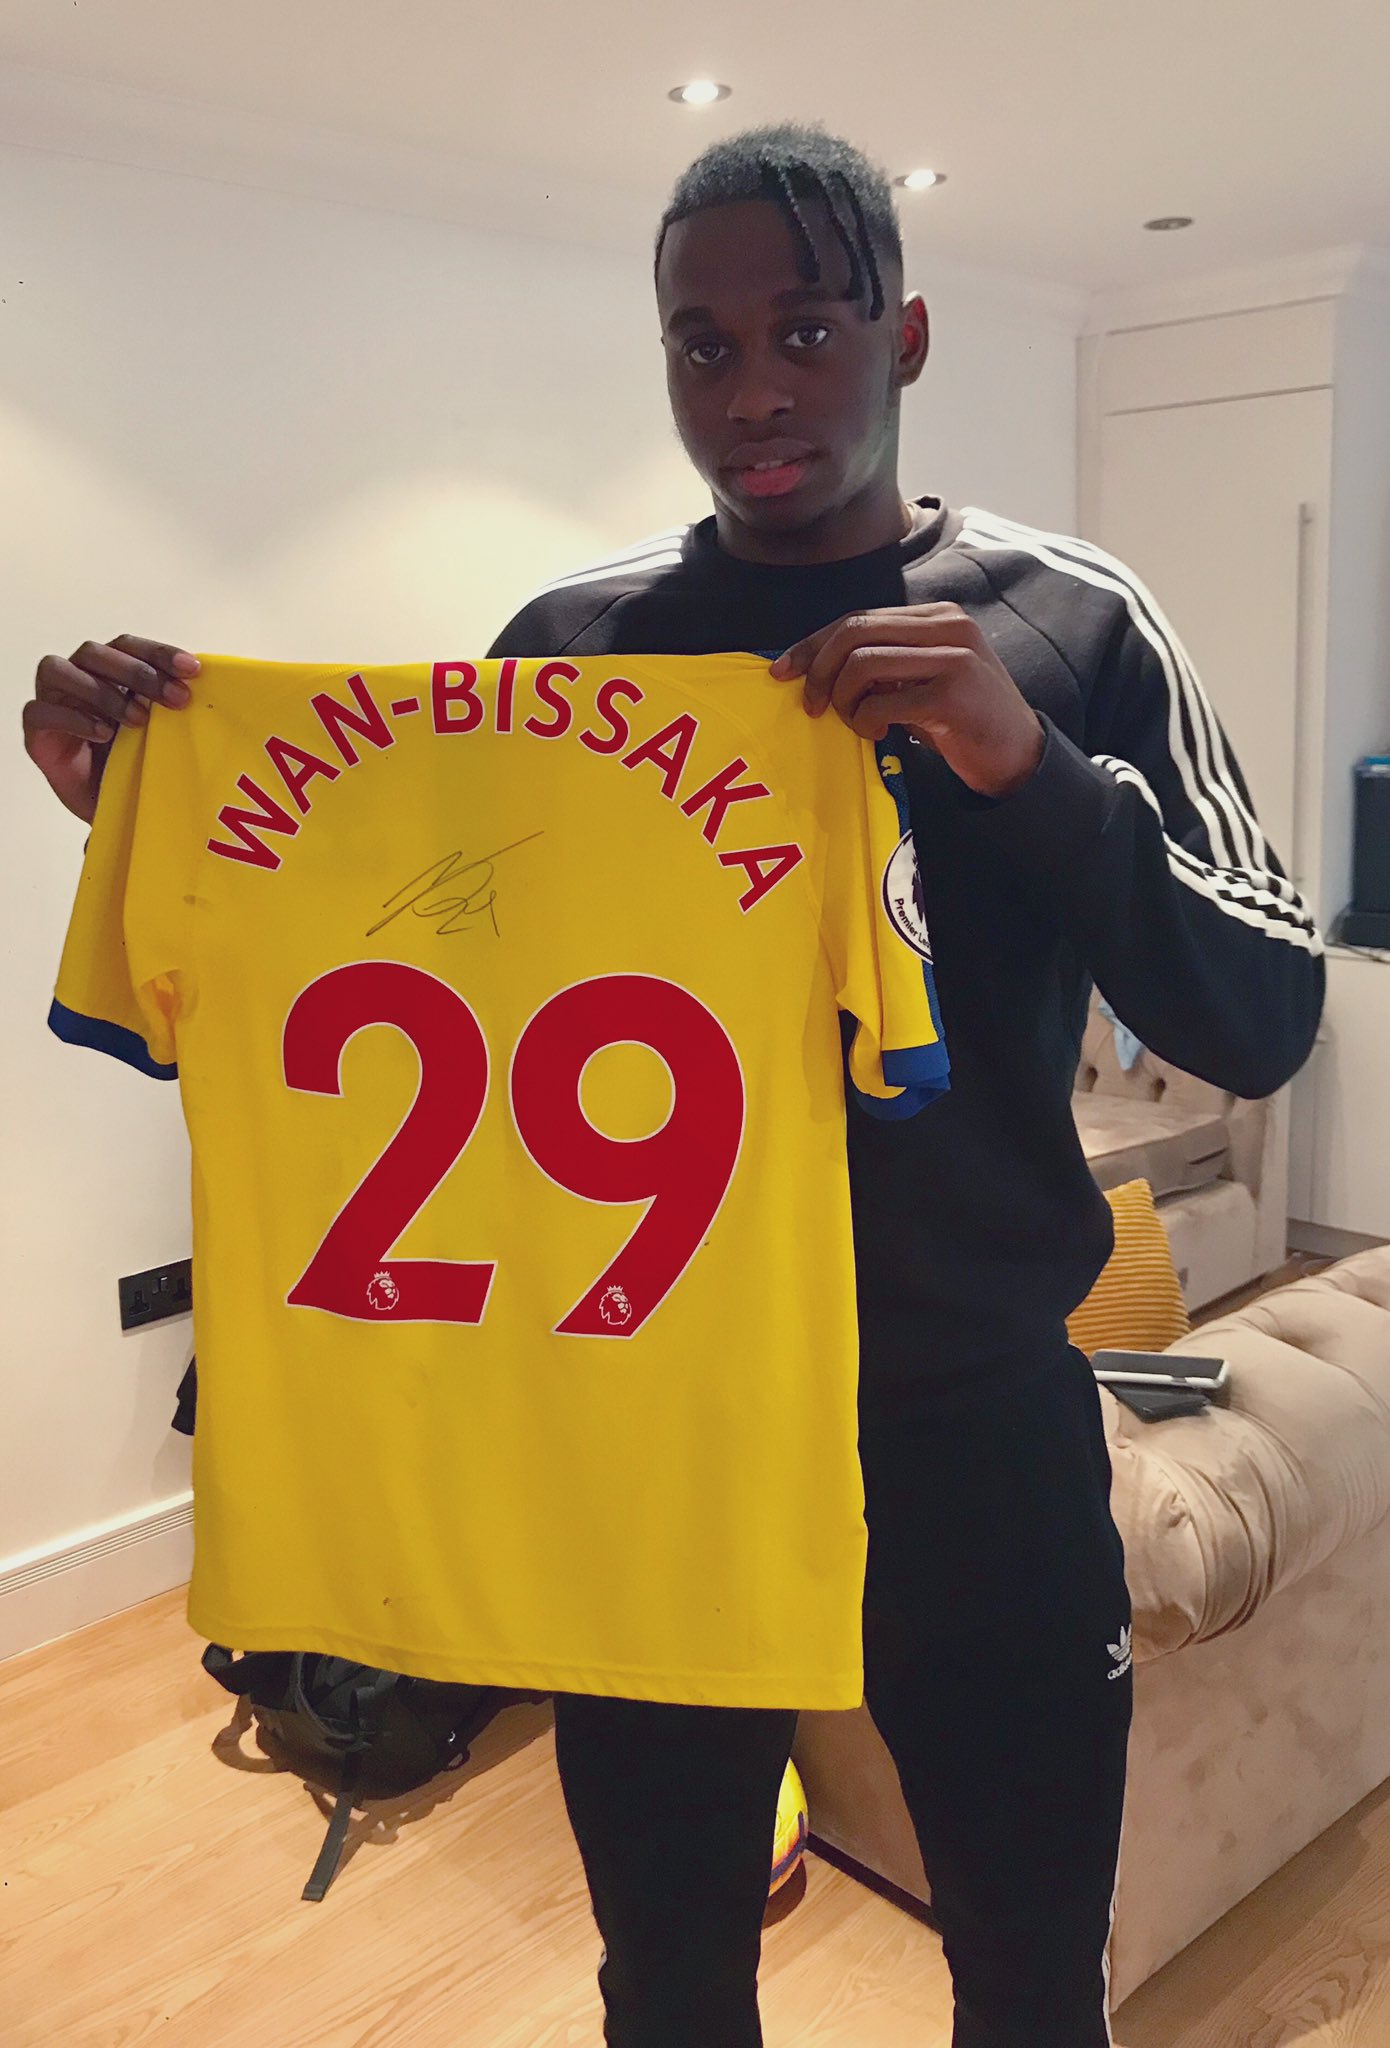 Aaron Wan-Bissaka on X: "To thank you all for your support this season I'm  giving away this signed shirt. All you have to do to enter is RT and like  this tweet!